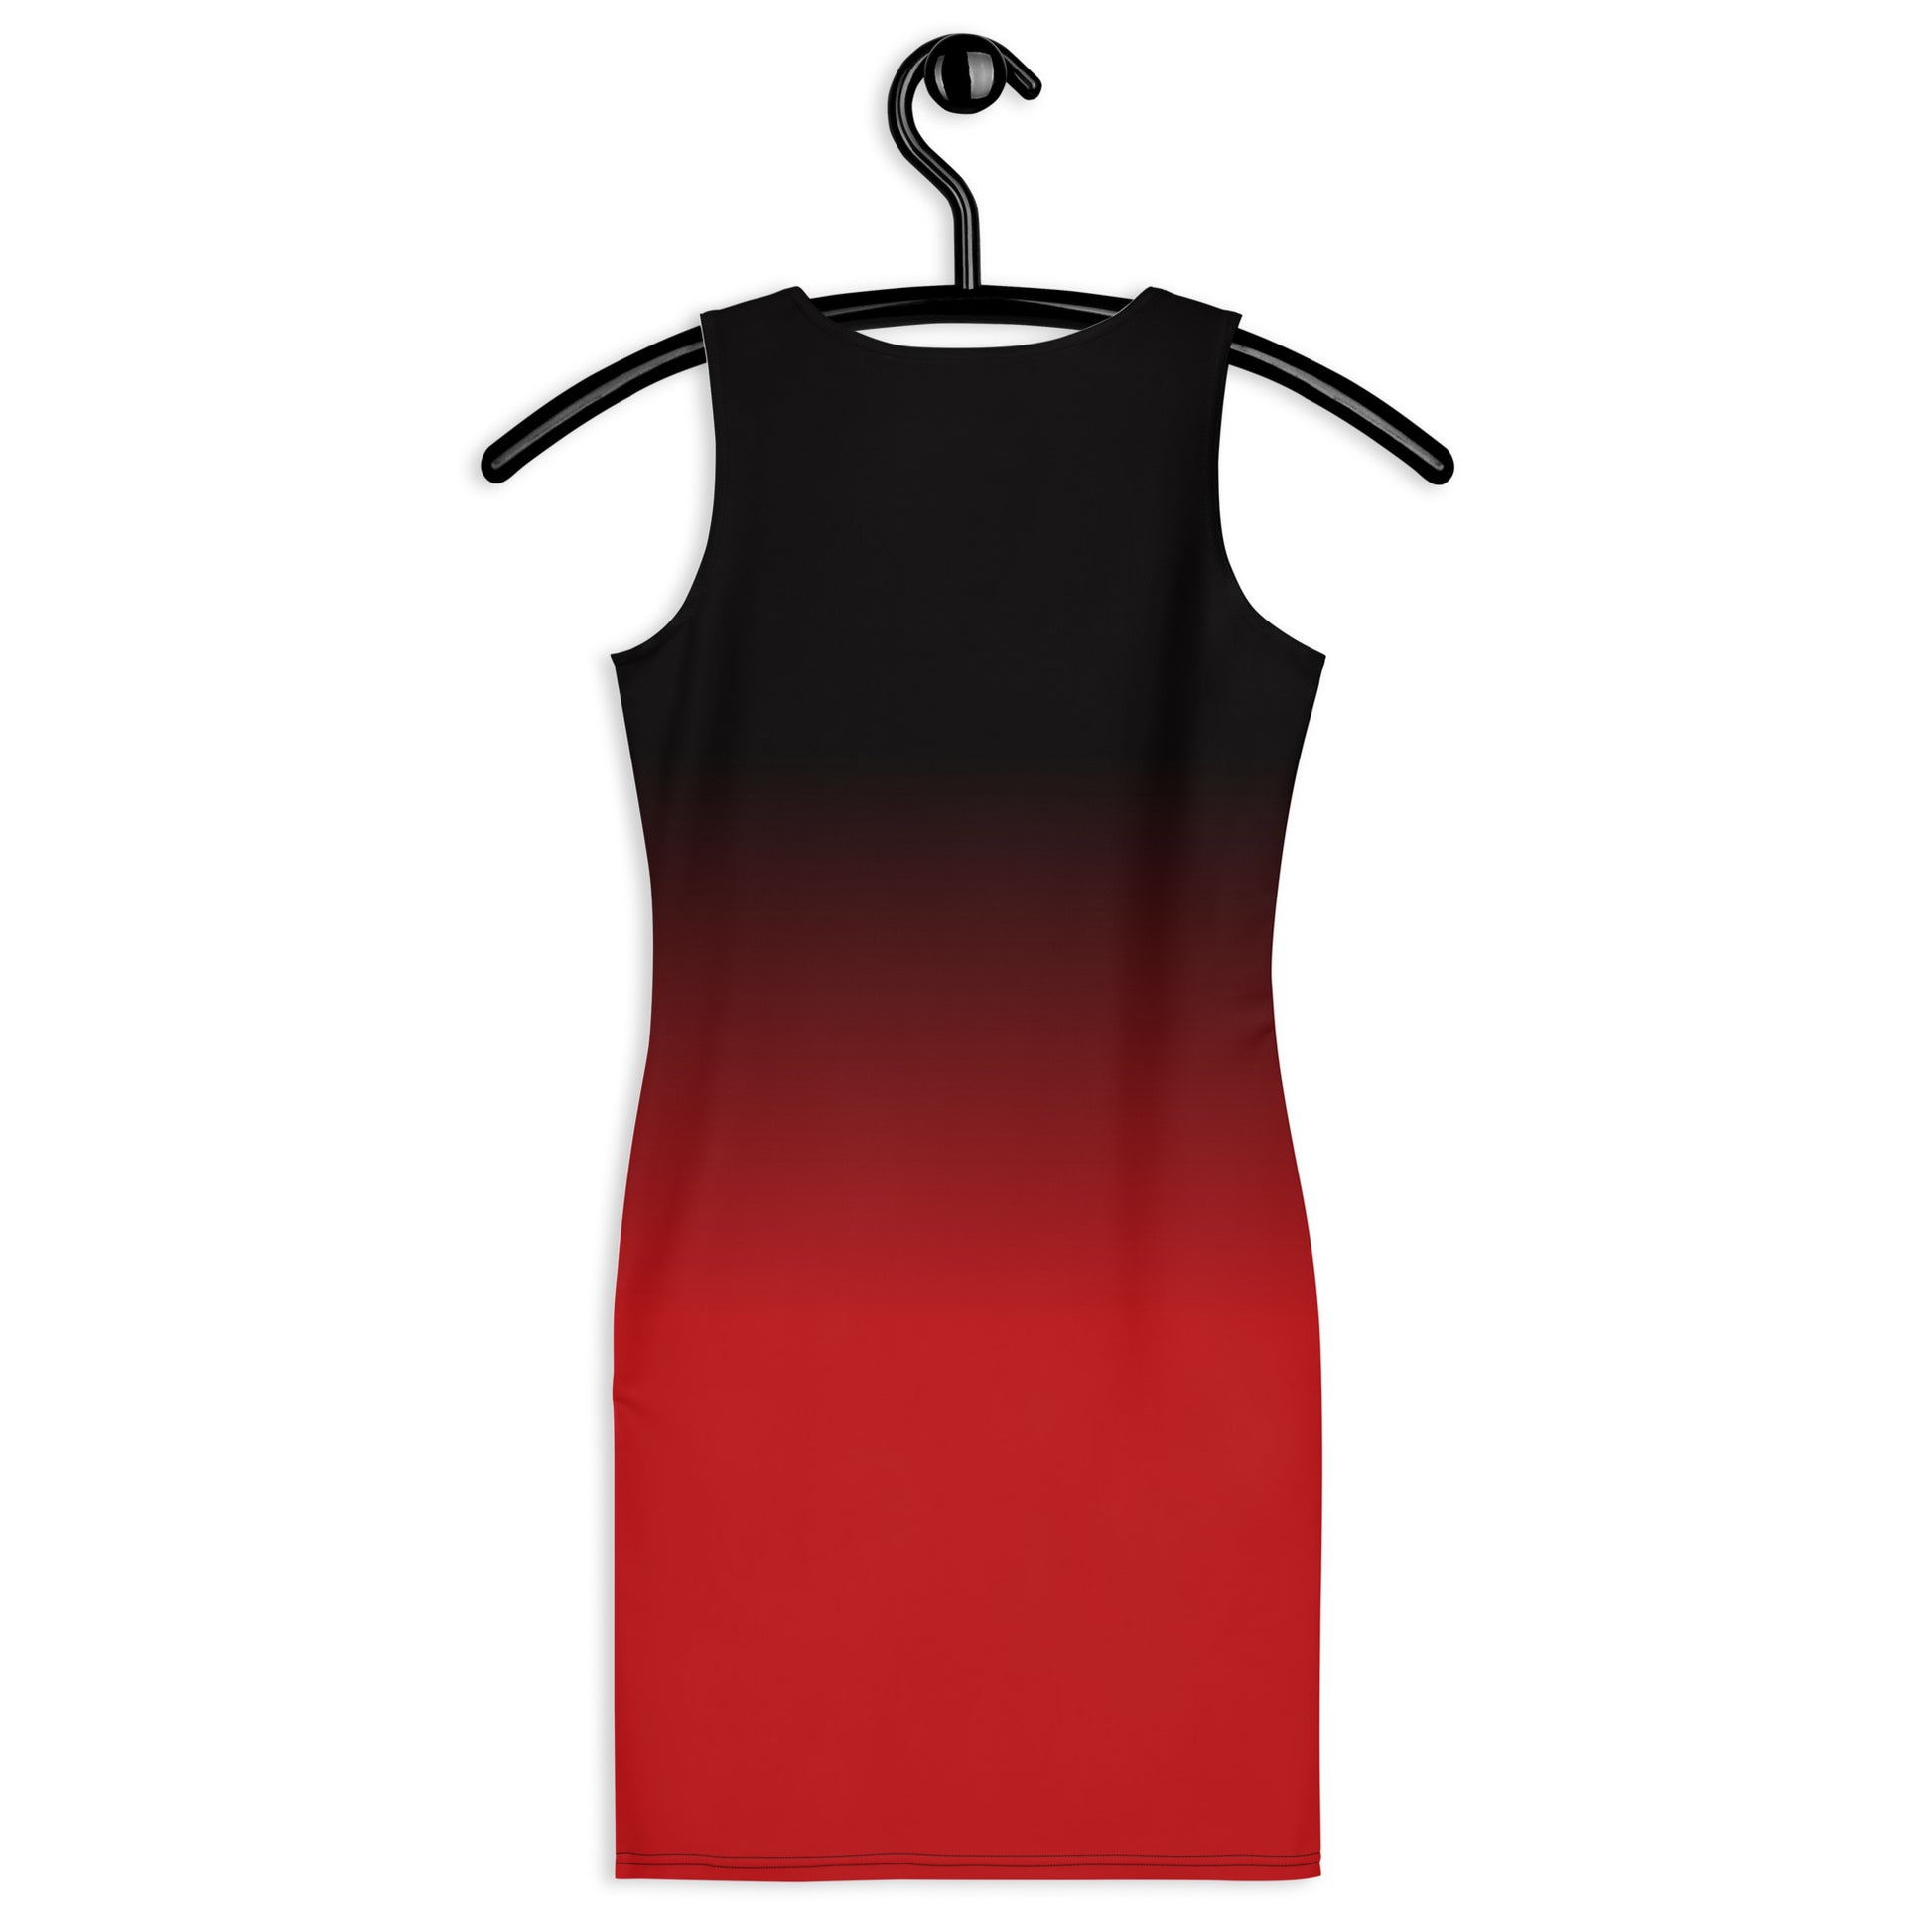 Ombre Bodycon Dress, Black and Red Summer Beach Dip Dye Gradient Evening Festival Sexy Pencil Mini Cocktail Dress Women Girls Starcove Fashion